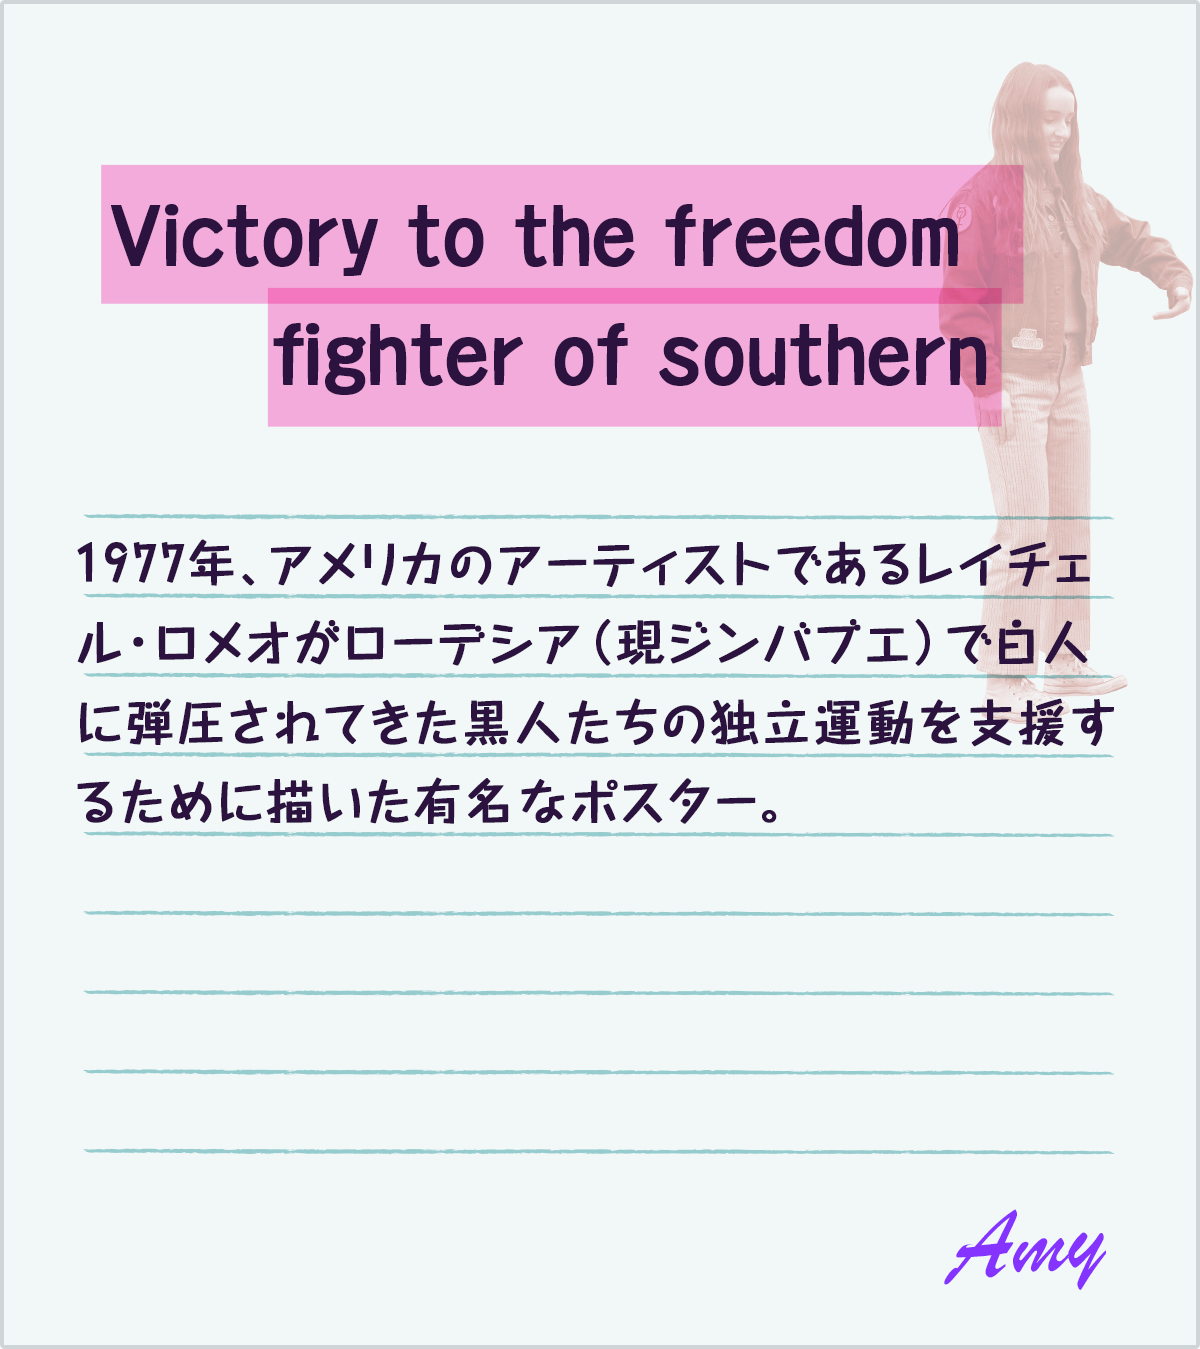 Victory to the freedom fighter of southern